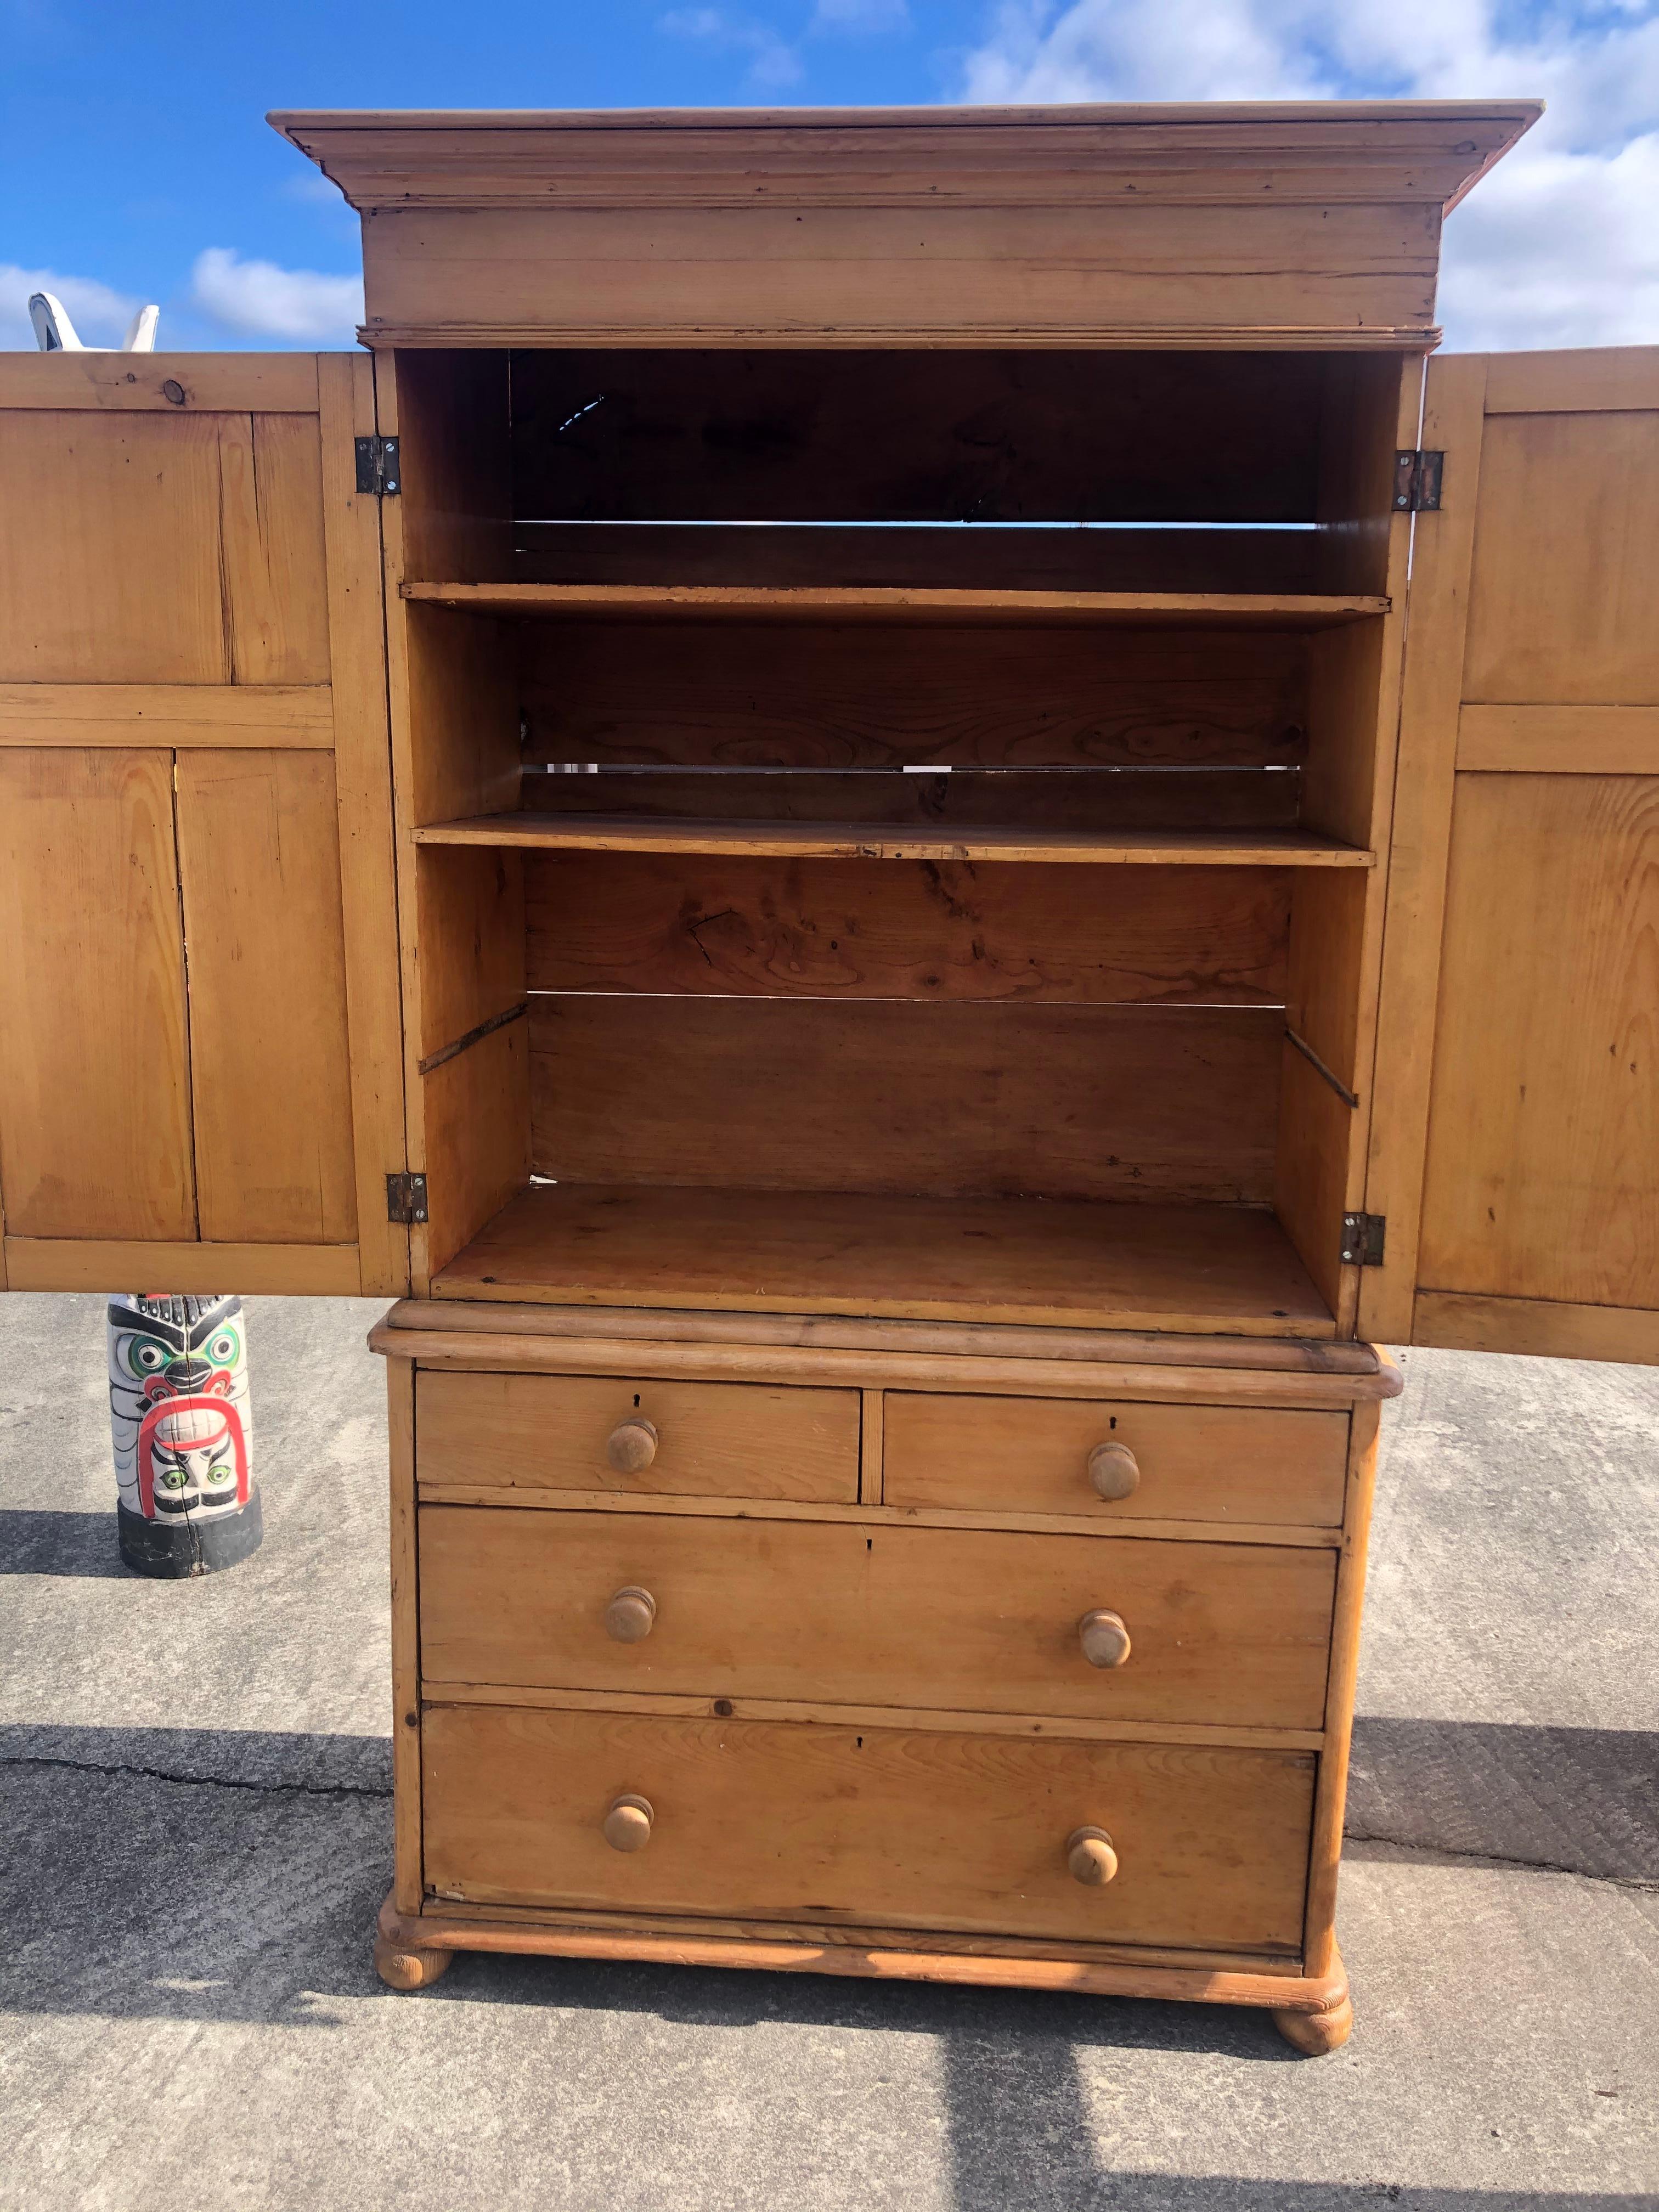 A rustic antique natural pine cabinet wardrobe in two pieces; top has panel doors that open to roomy storage, once used to house a television. There are two shelves currently. Bottom has 4 dovetailed drawers, 2 large with 2 smaller on top. The